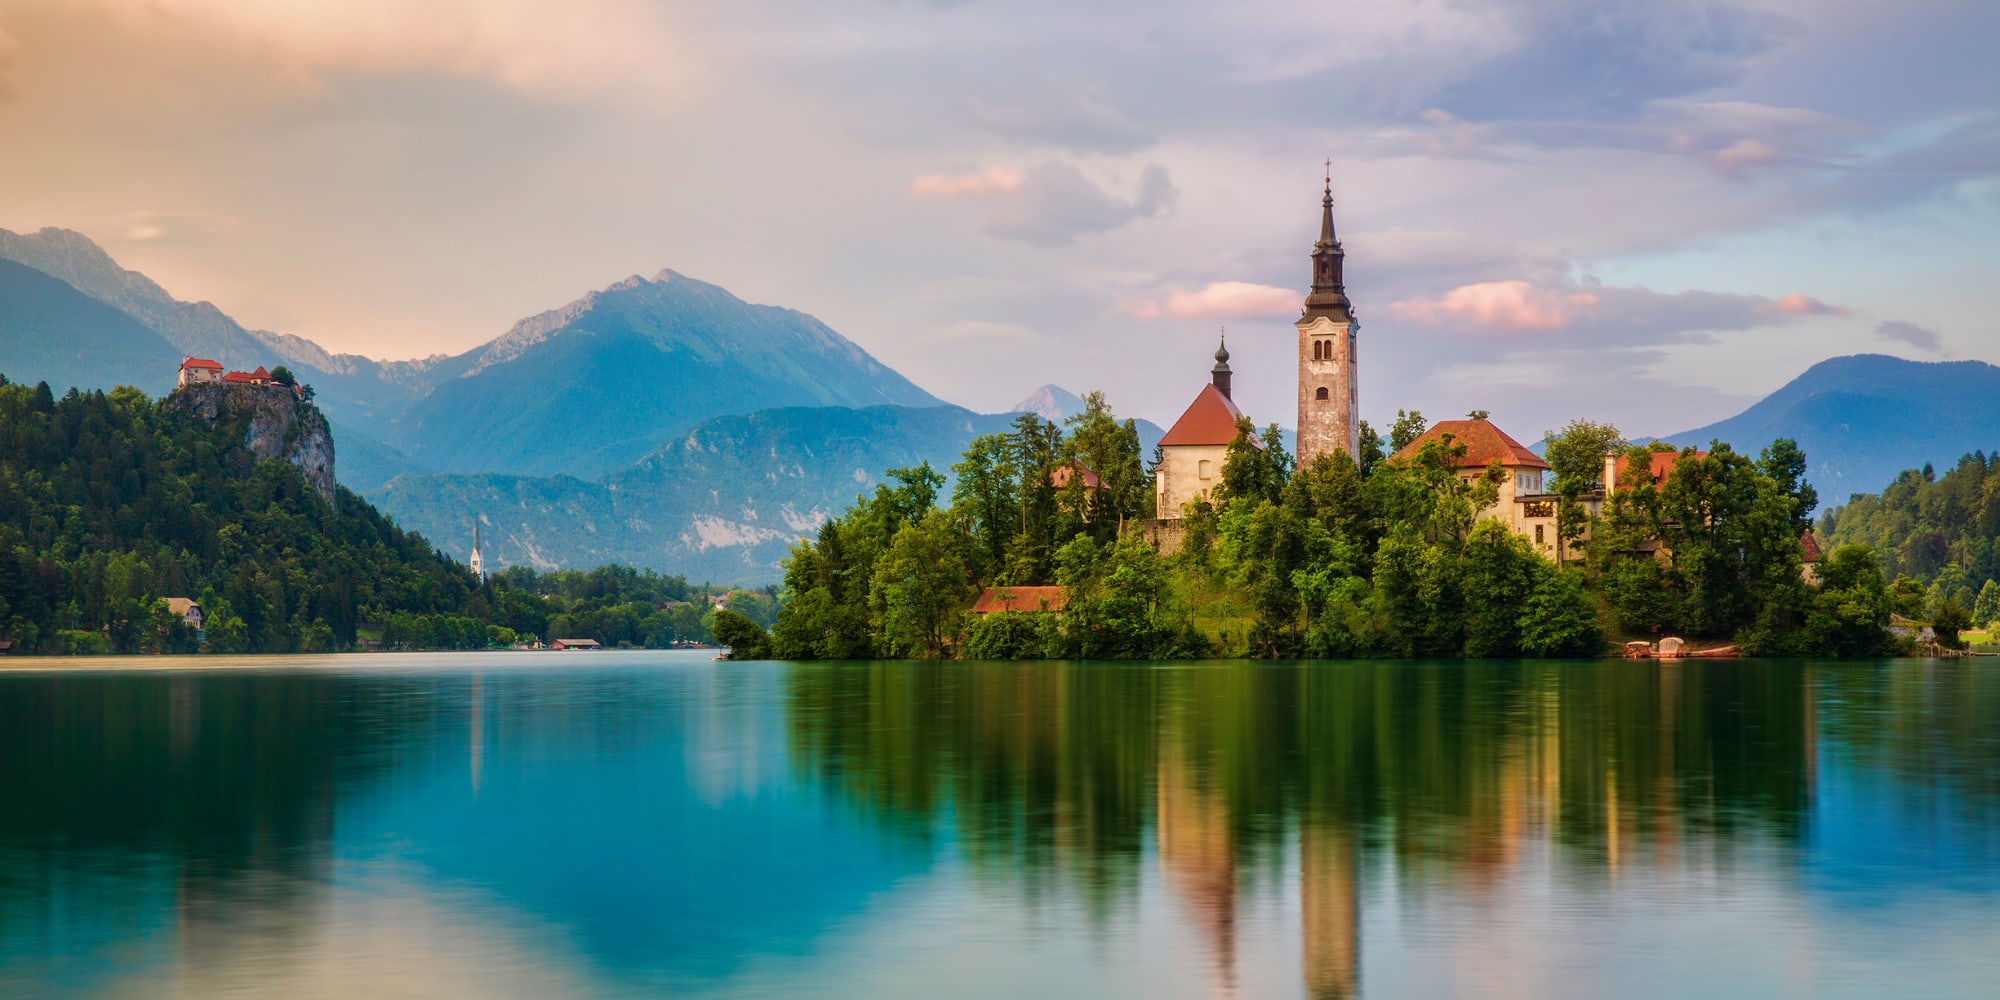 The cheapest countries to study in Europe - Slovenia